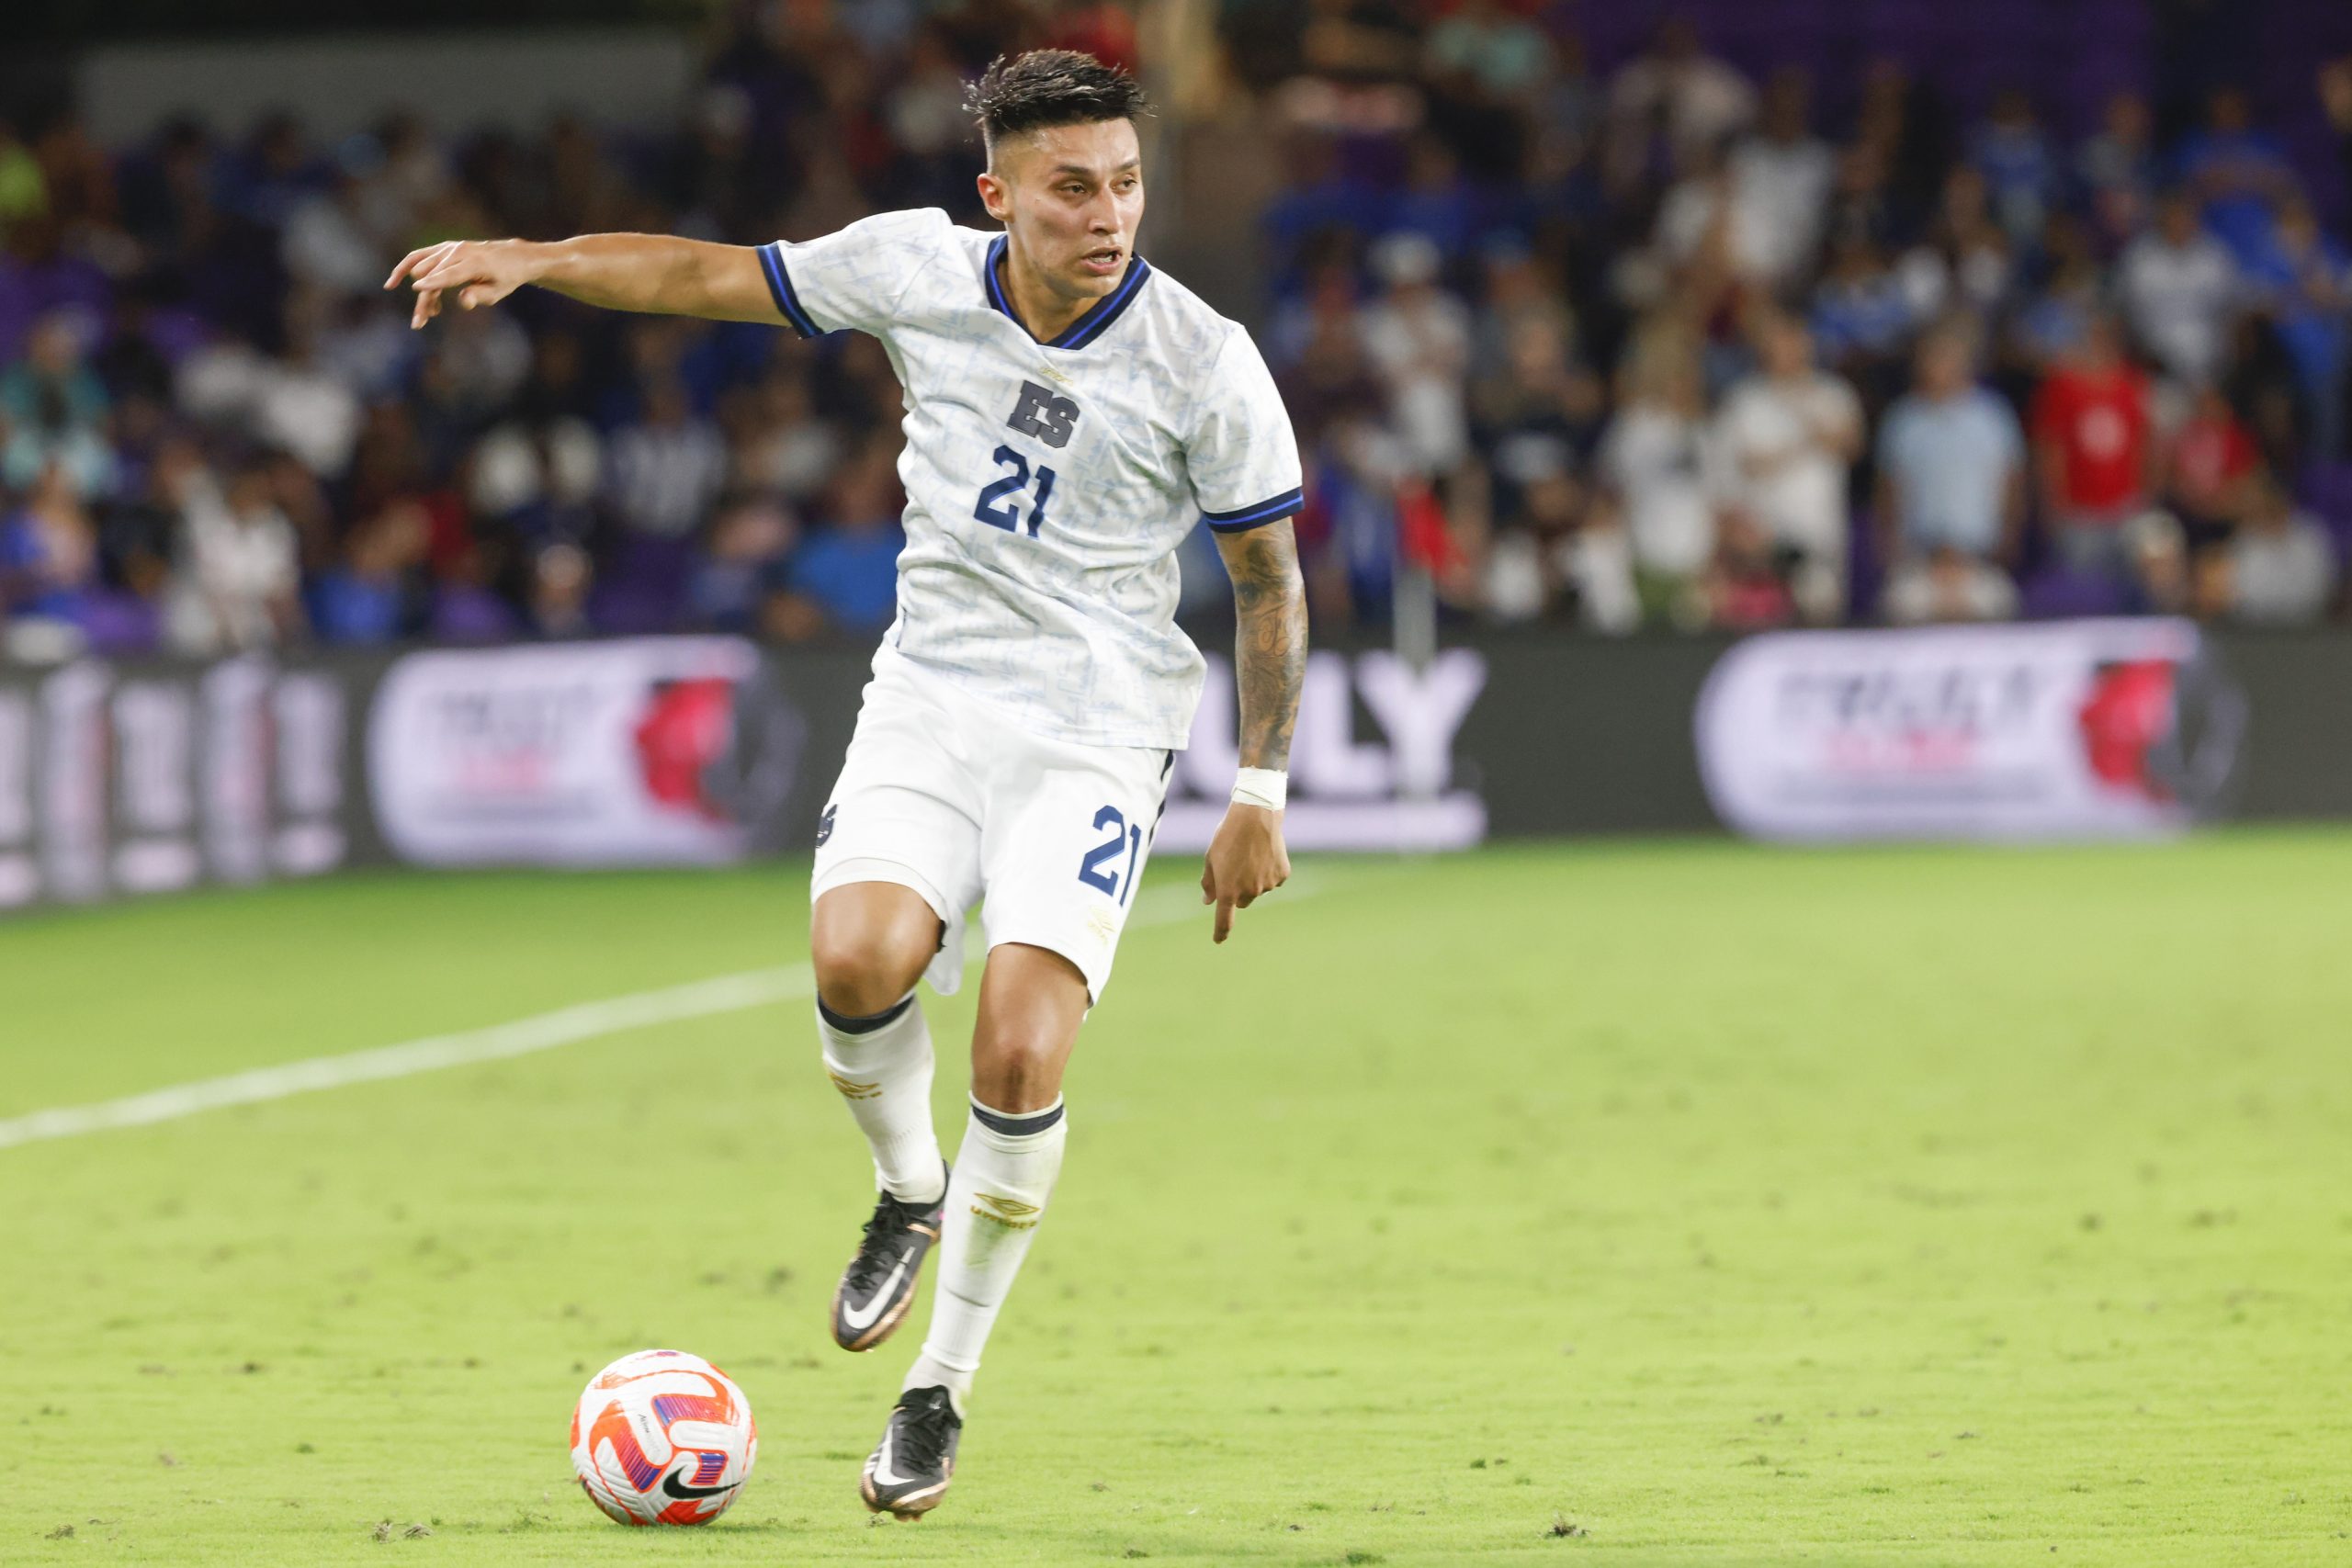 Soccer: Concacaf Nations League-El Salvador at USA on March 27, 2023